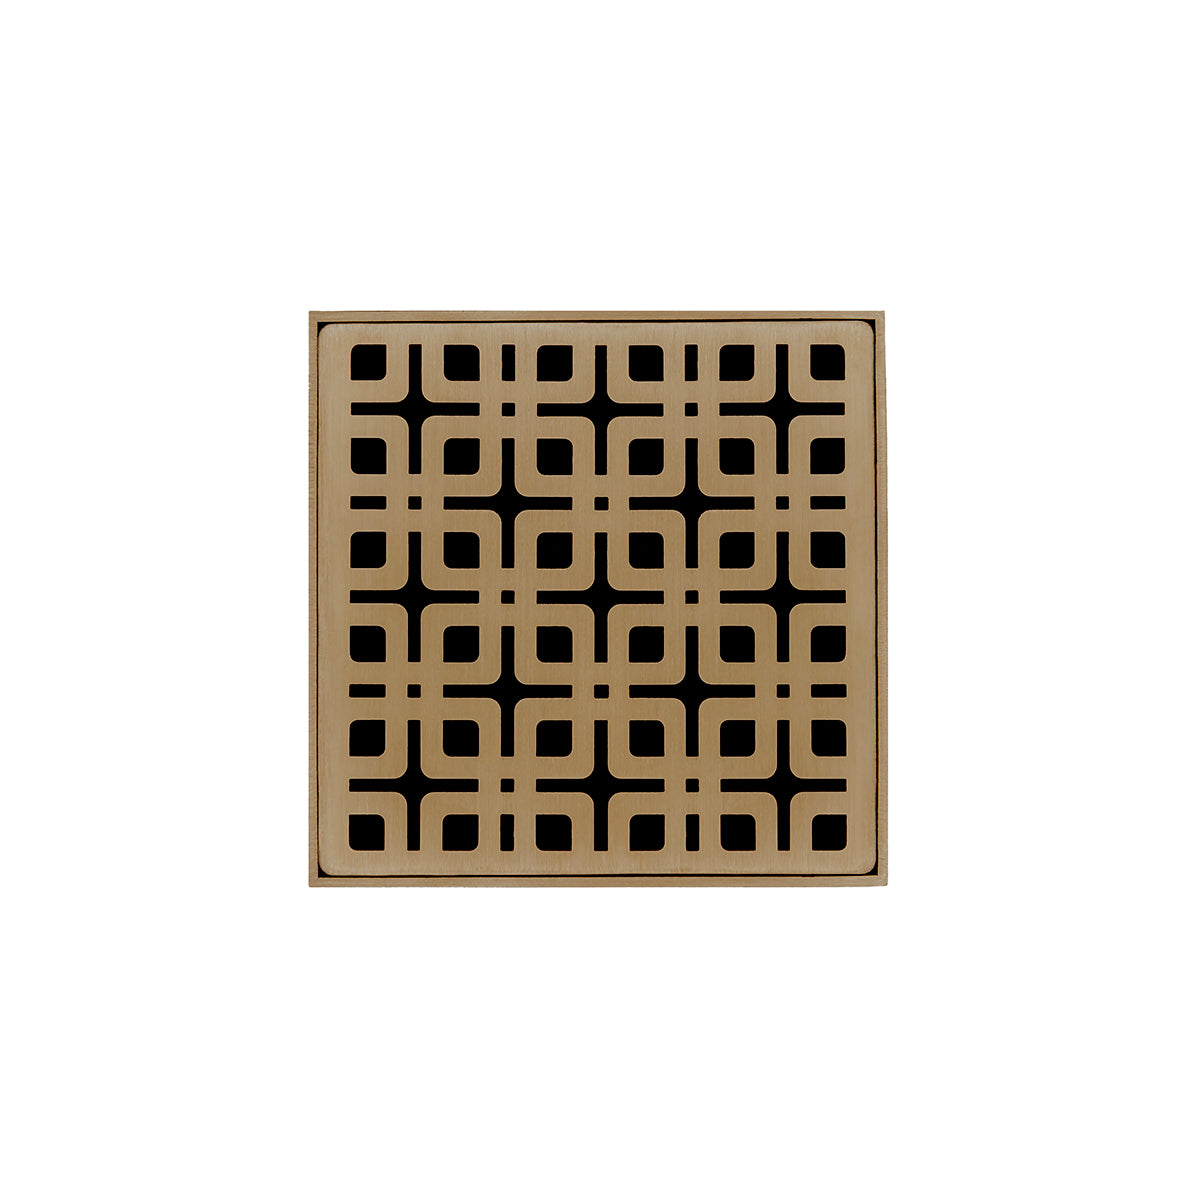 Infinity Drain 4" x 4" KD 4 Premium Center Drain Kit with Link Pattern Decorative Plate with Cast Iron Drain Body, 2" Outlet